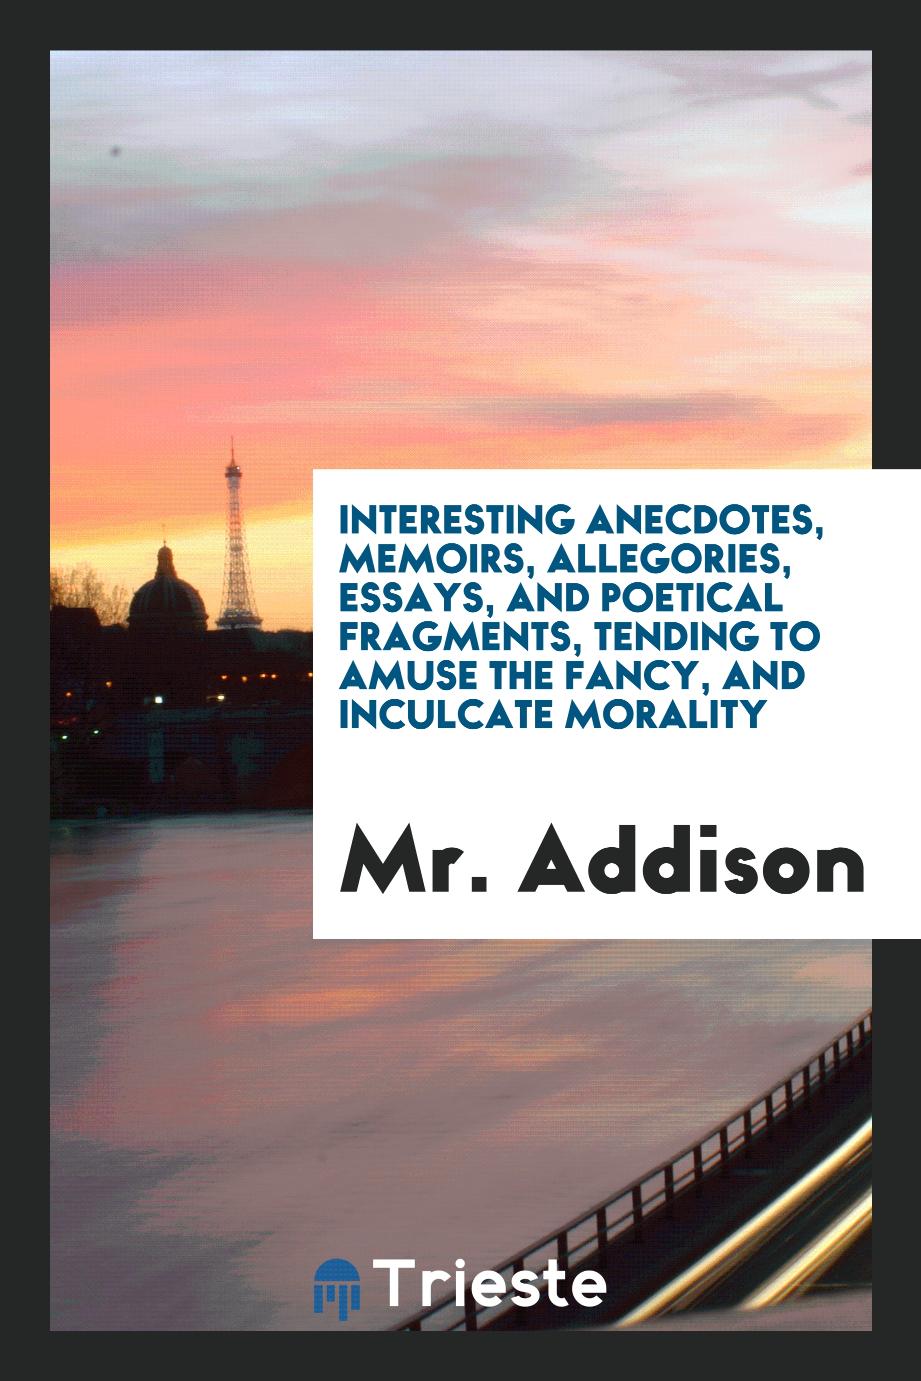 Interesting Anecdotes, Memoirs, Allegories, Essays, and Poetical Fragments, Tending to Amuse the Fancy, and Inculcate Morality